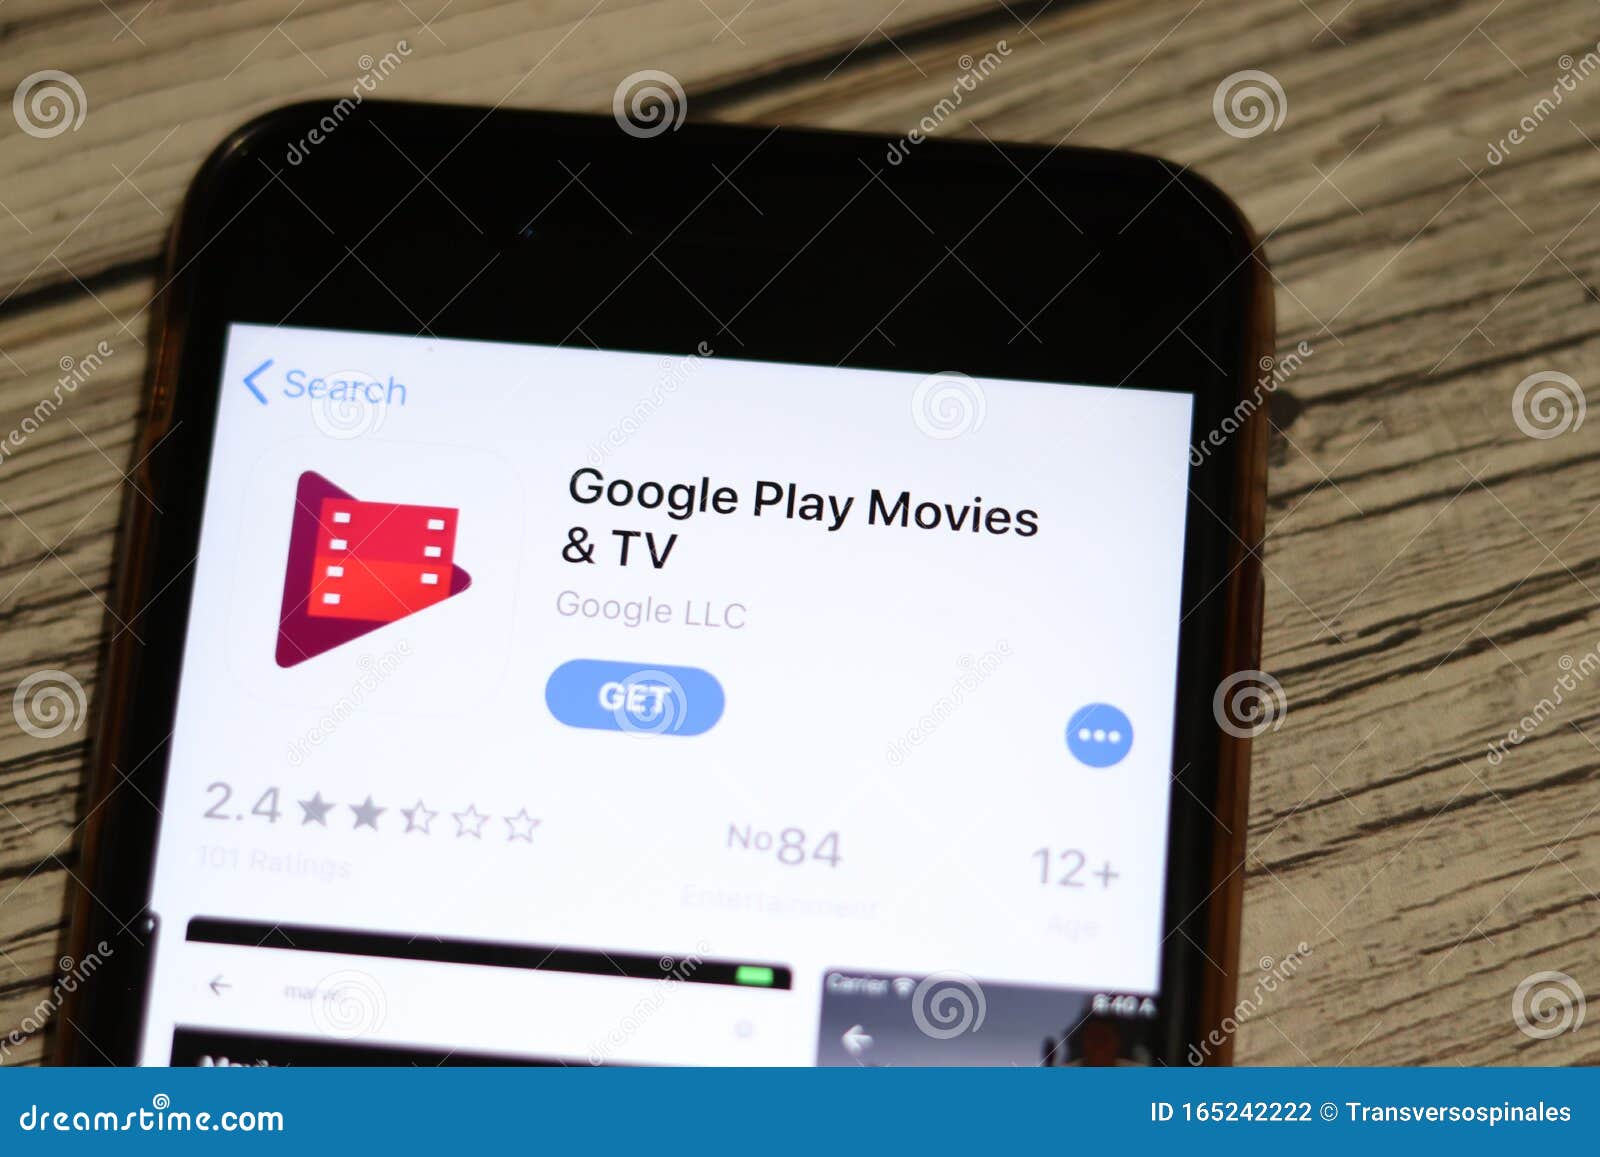 147 Google Play Movies Photos Free Royalty Free Stock Photos From Dreamstime